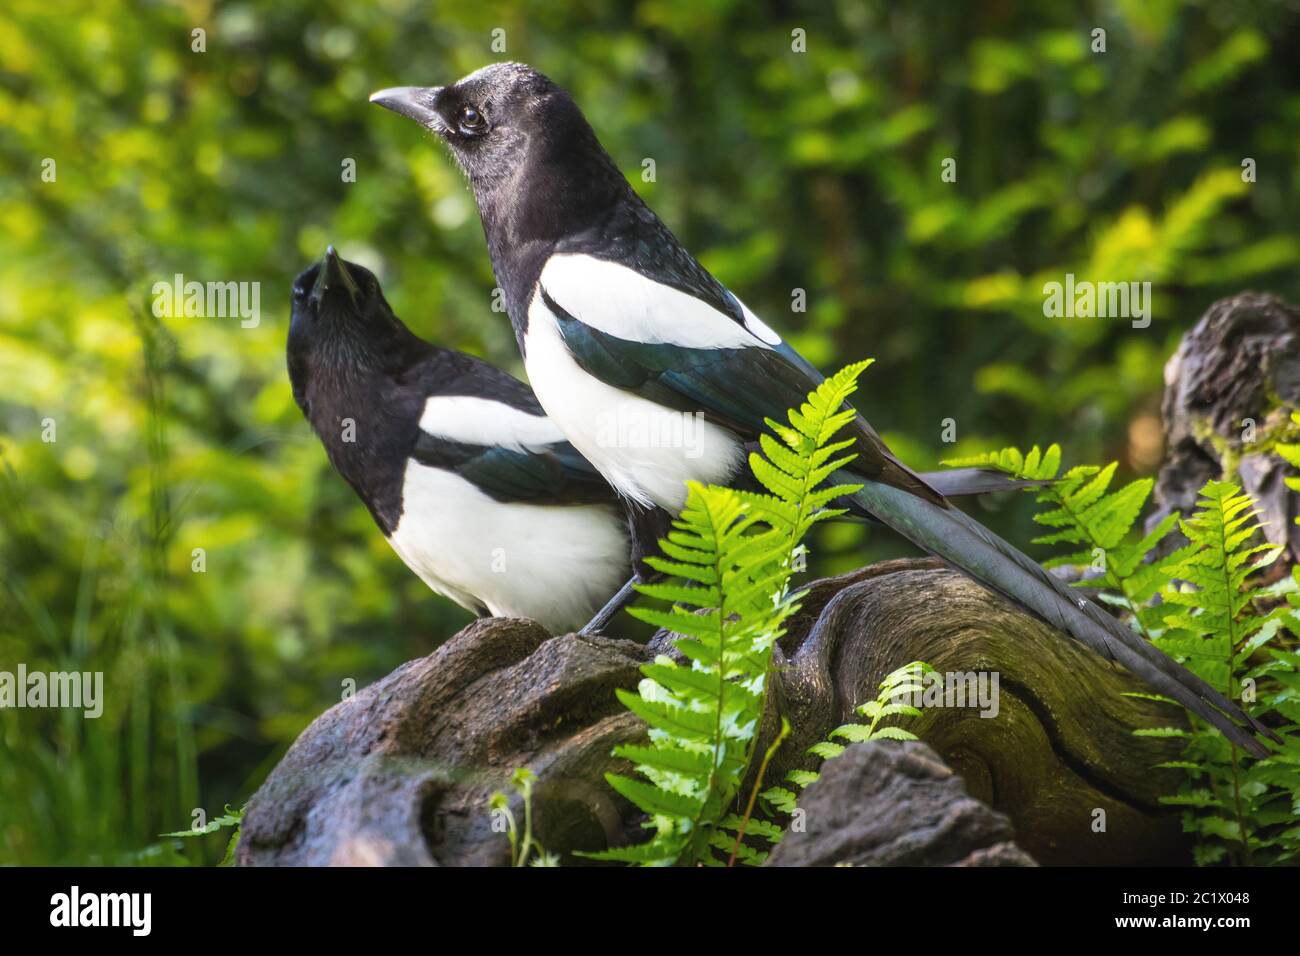 black-billed magpie (Pica pica), two black-billed magpies perches on a root and peering, Switzerland, Sankt Gallen Stock Photo